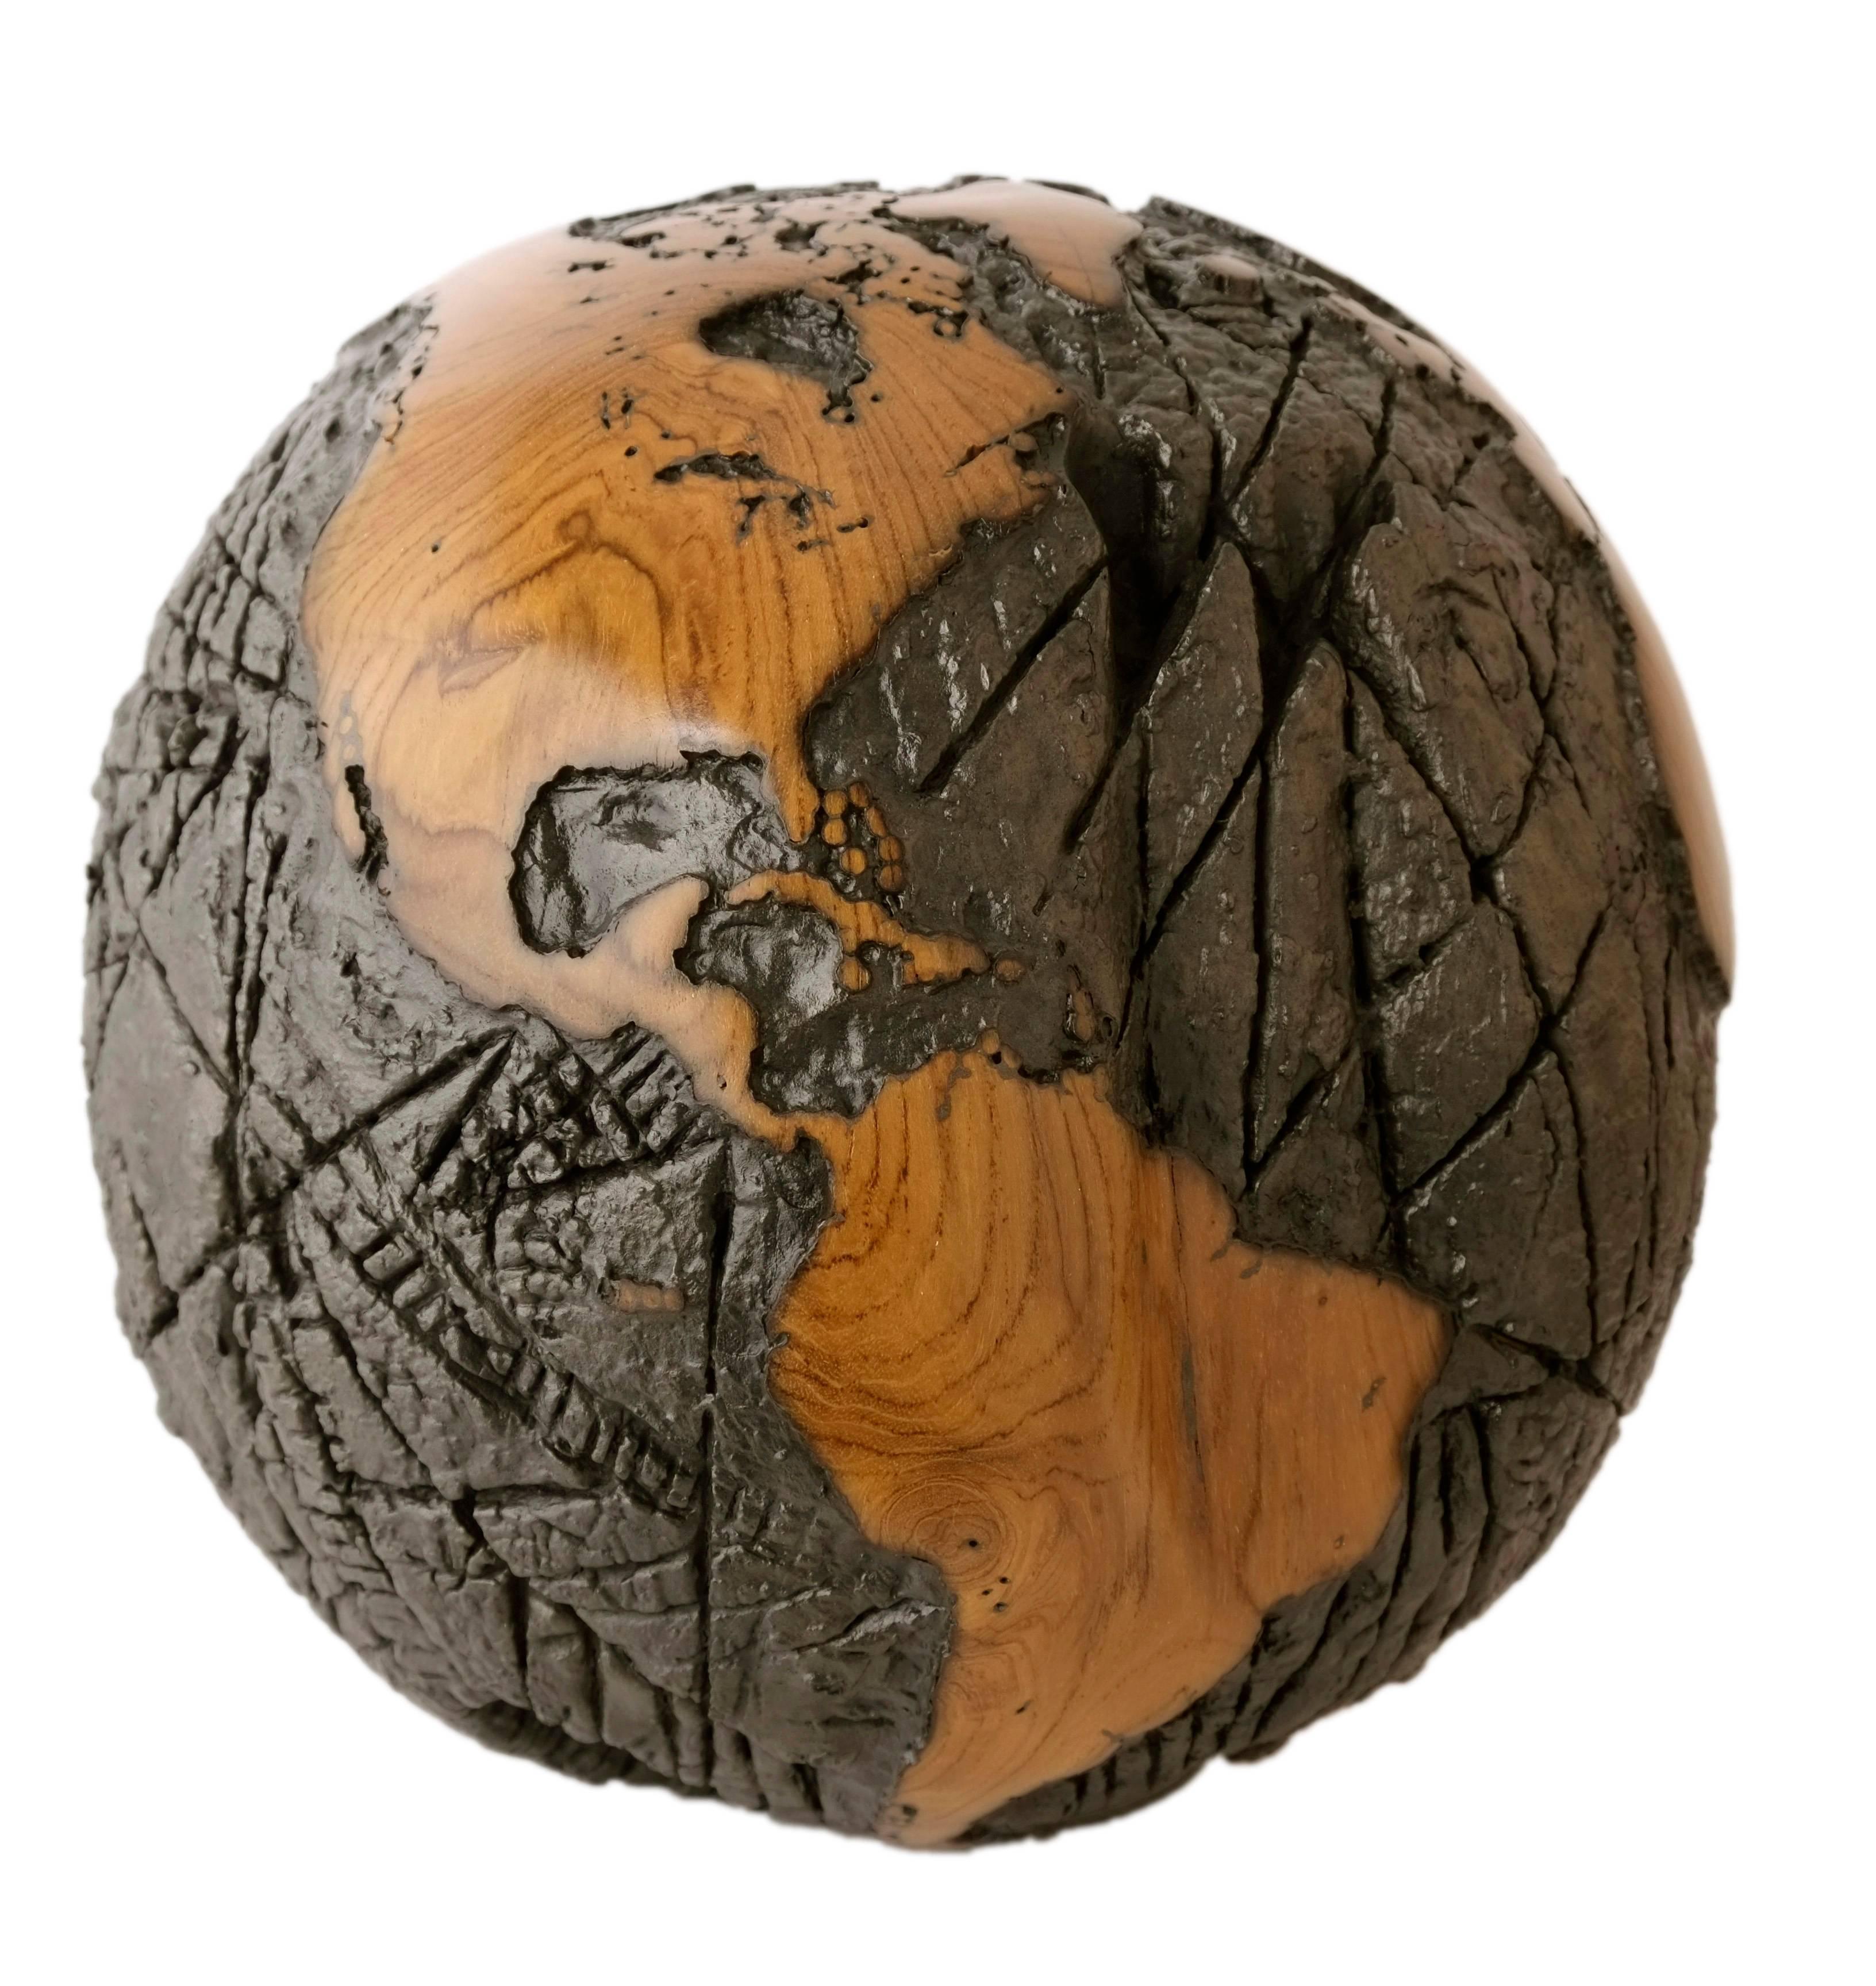 Wooden globe made of teak root and metal with cold lava flow texture, 30 cm